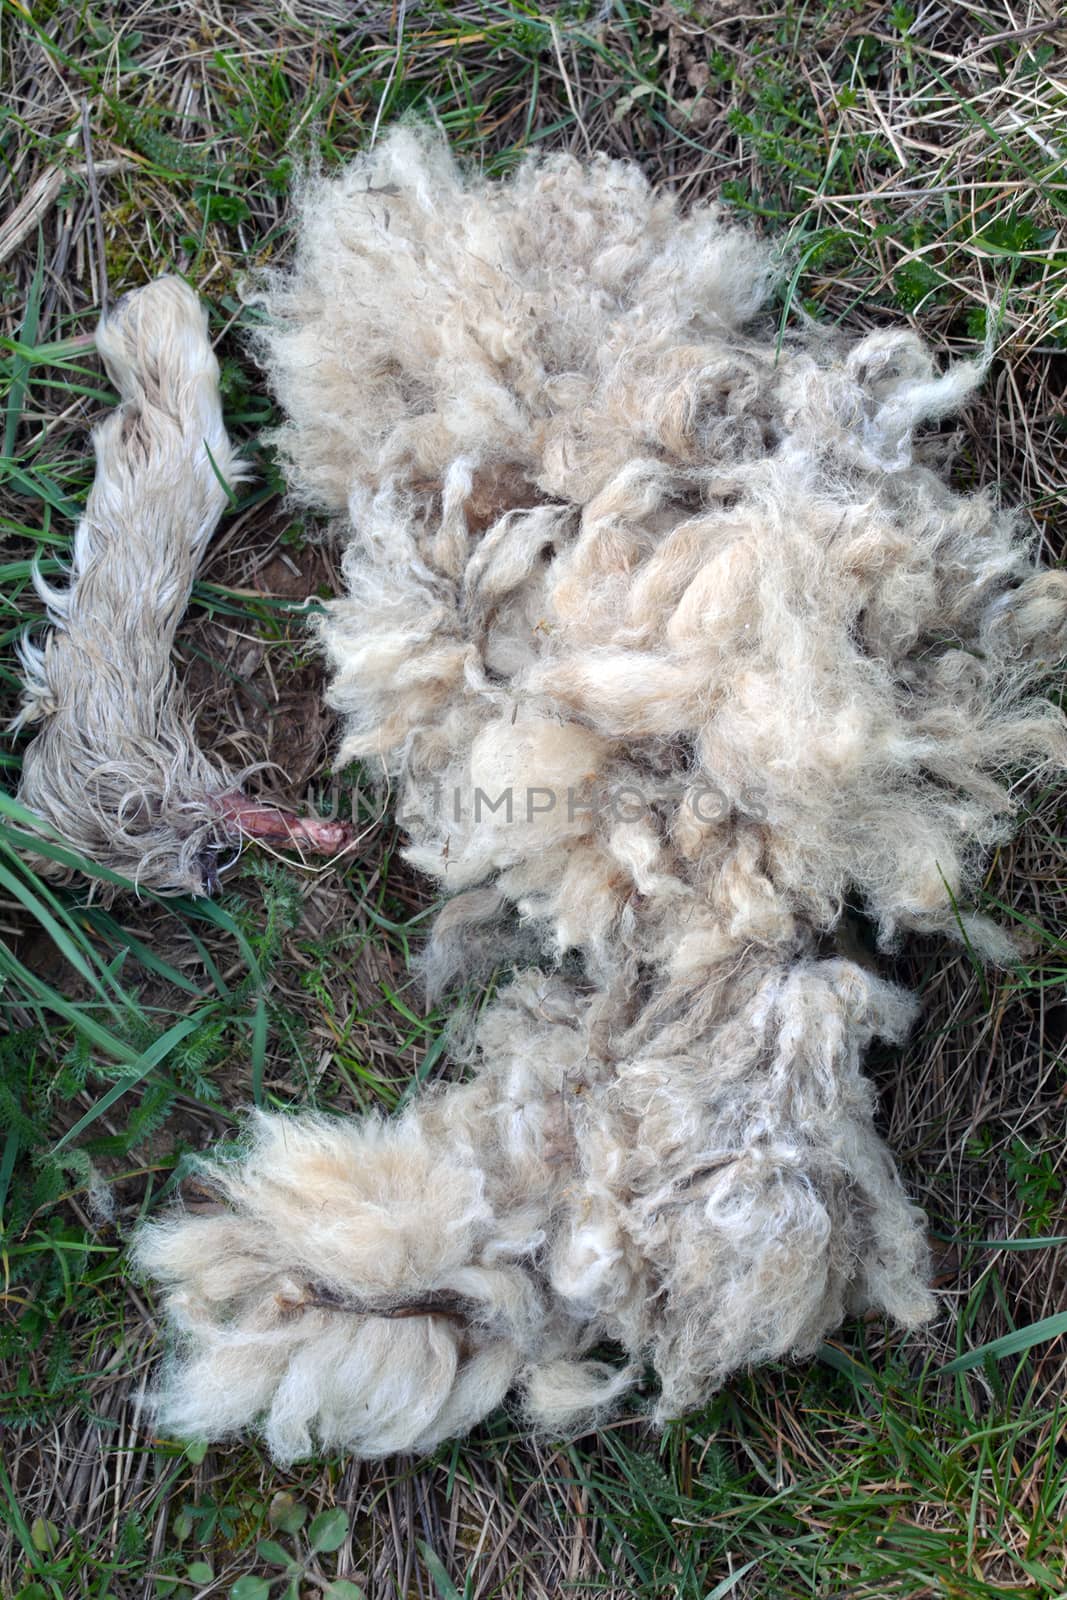 Dead lamb remains by photosampler